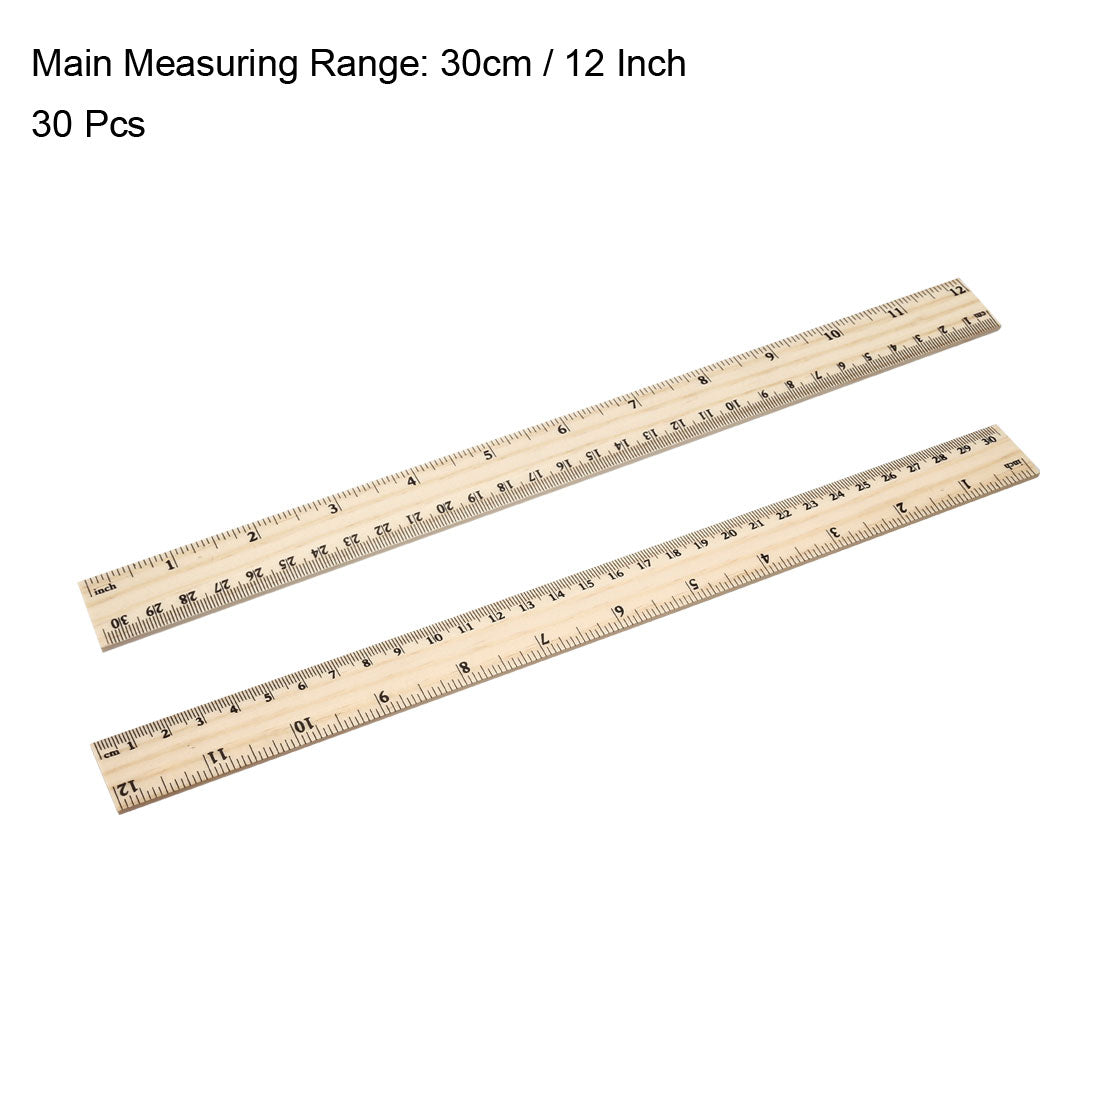 uxcell Uxcell Wood Ruler 30cm 12 Inch 2 Scale Office Rulers Wooden Measuring Ruler 30pcs